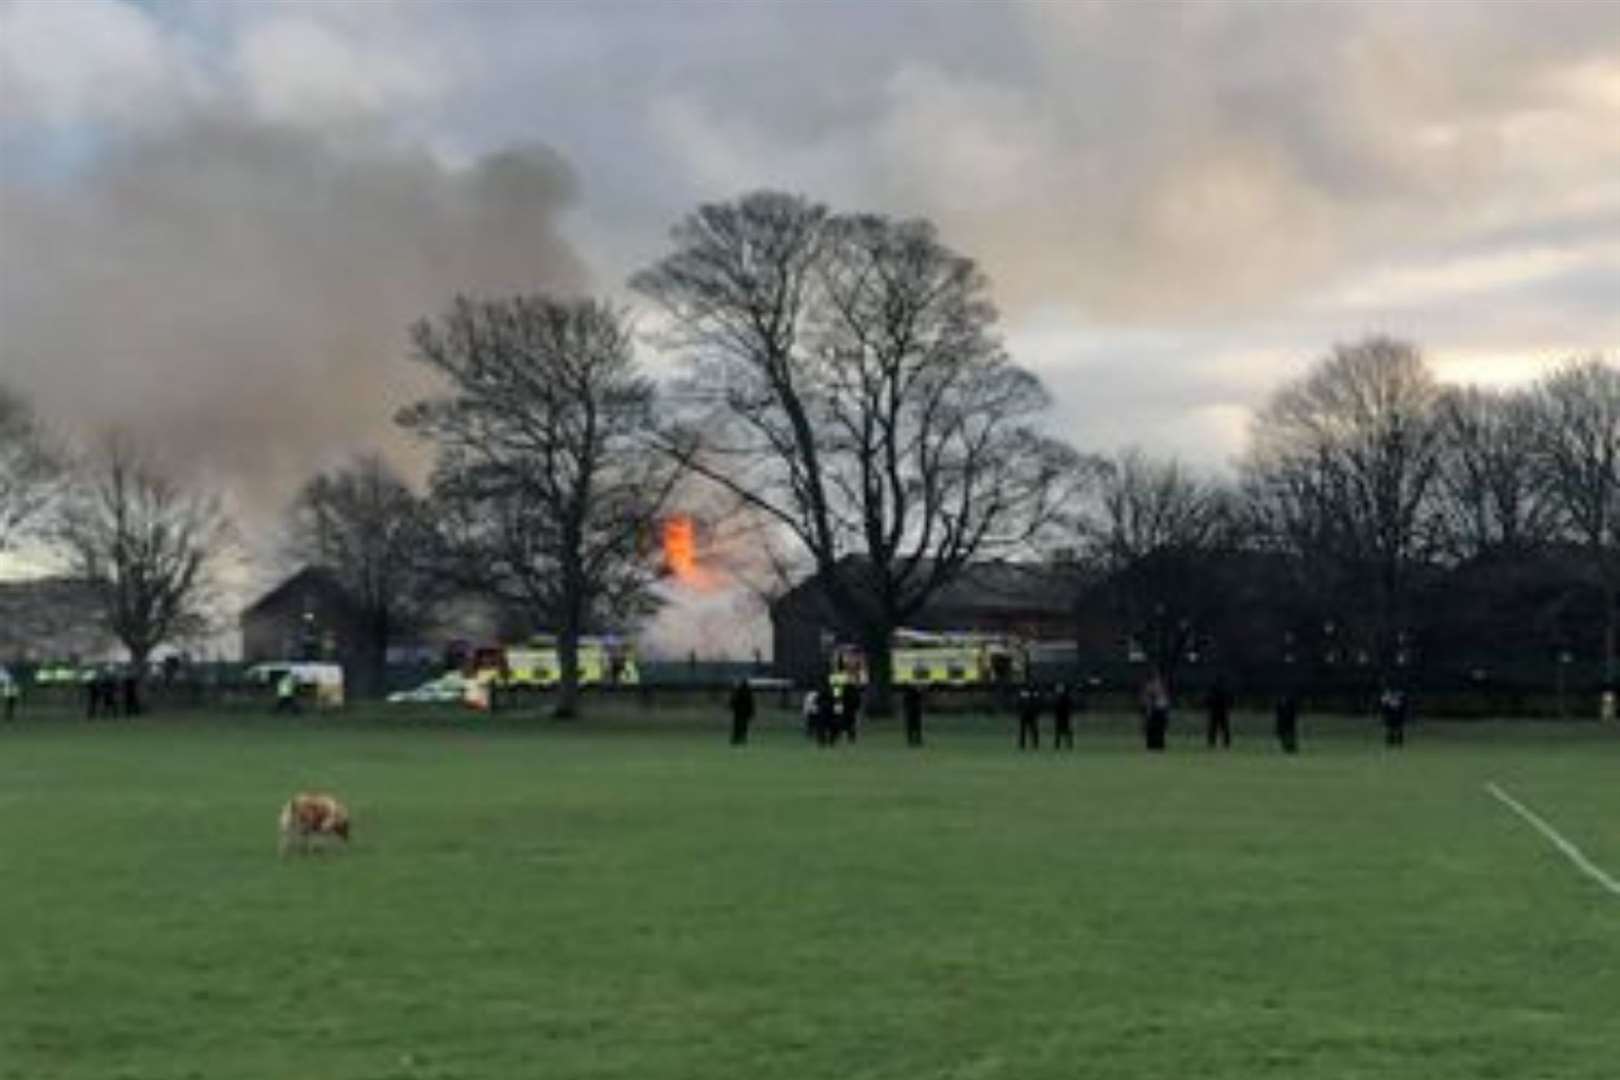 Flames and smoke could be seen at the barracks on Friday